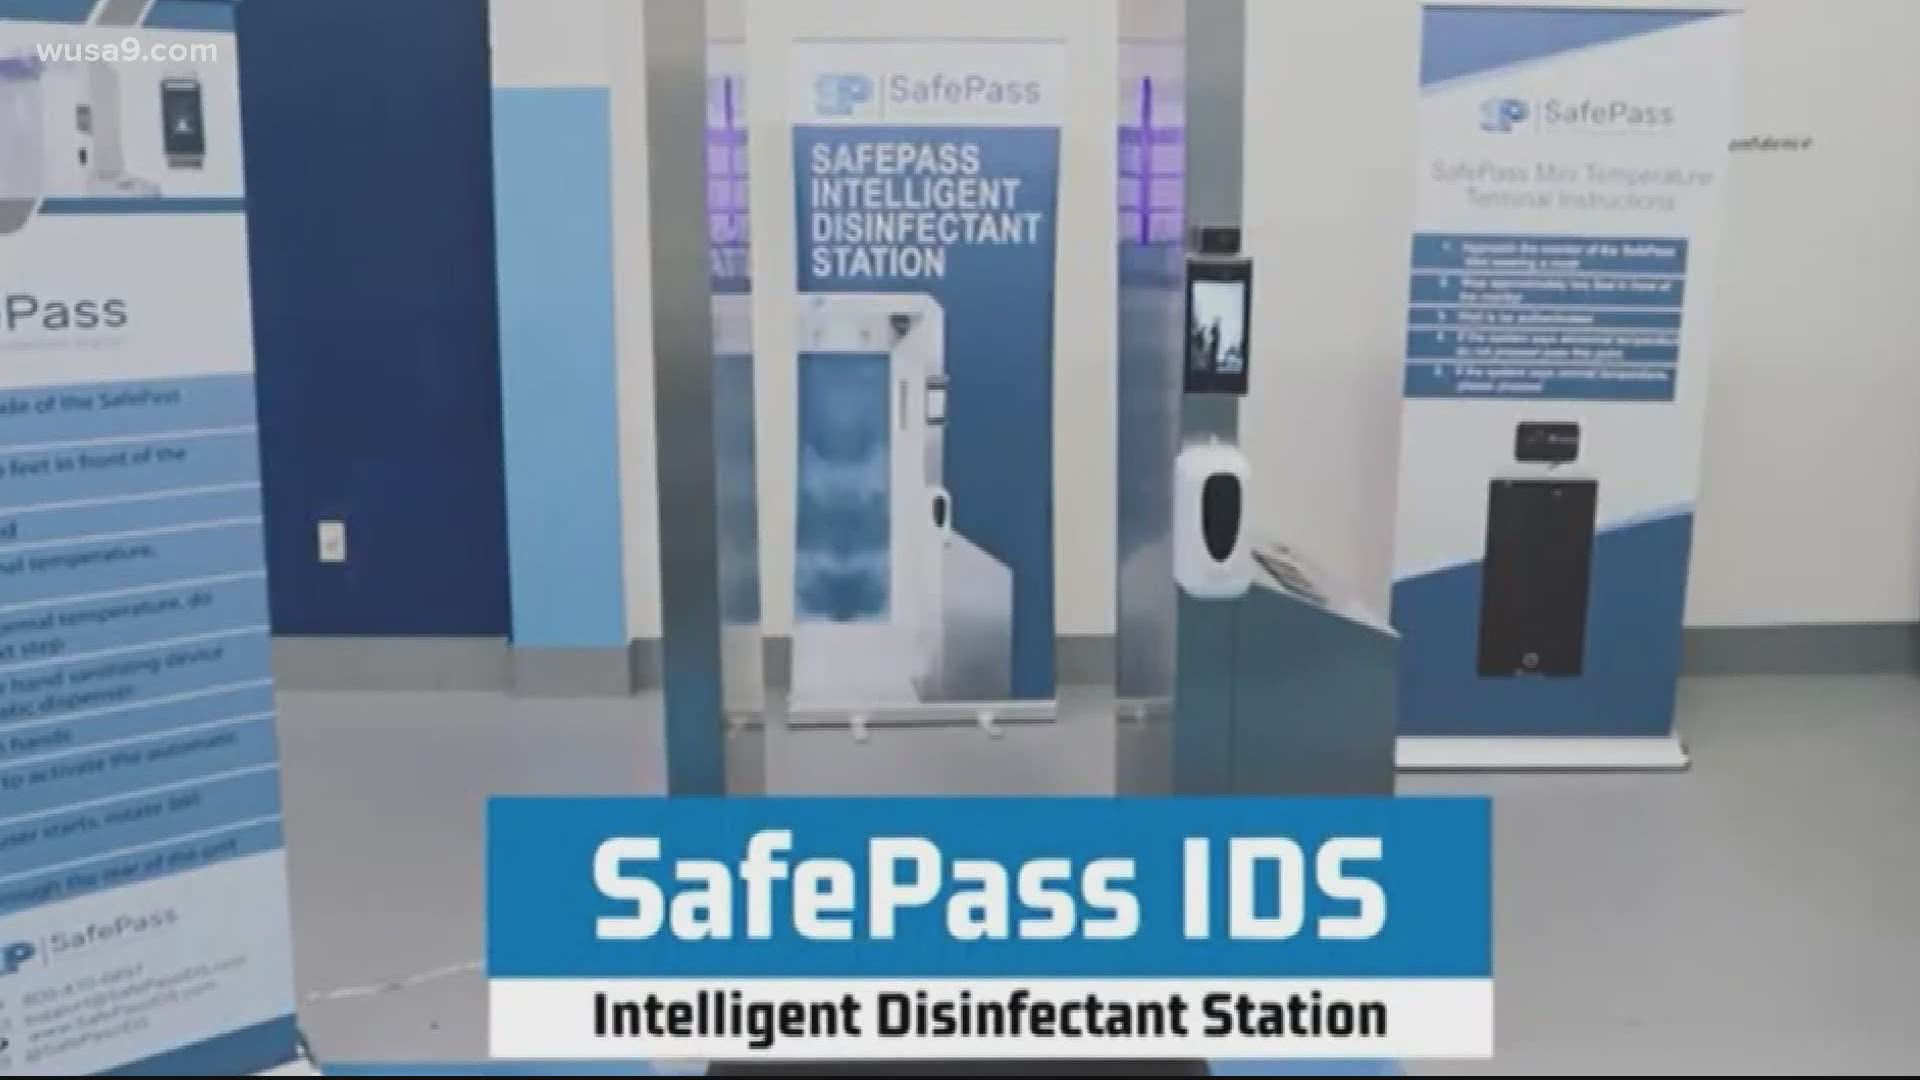 CEO Donald Toatley says NBA, FIFA and Metro are now eyeing his SafePass Intelligent Disinfectant Station or SafePass ID to add a layer of protection in public.